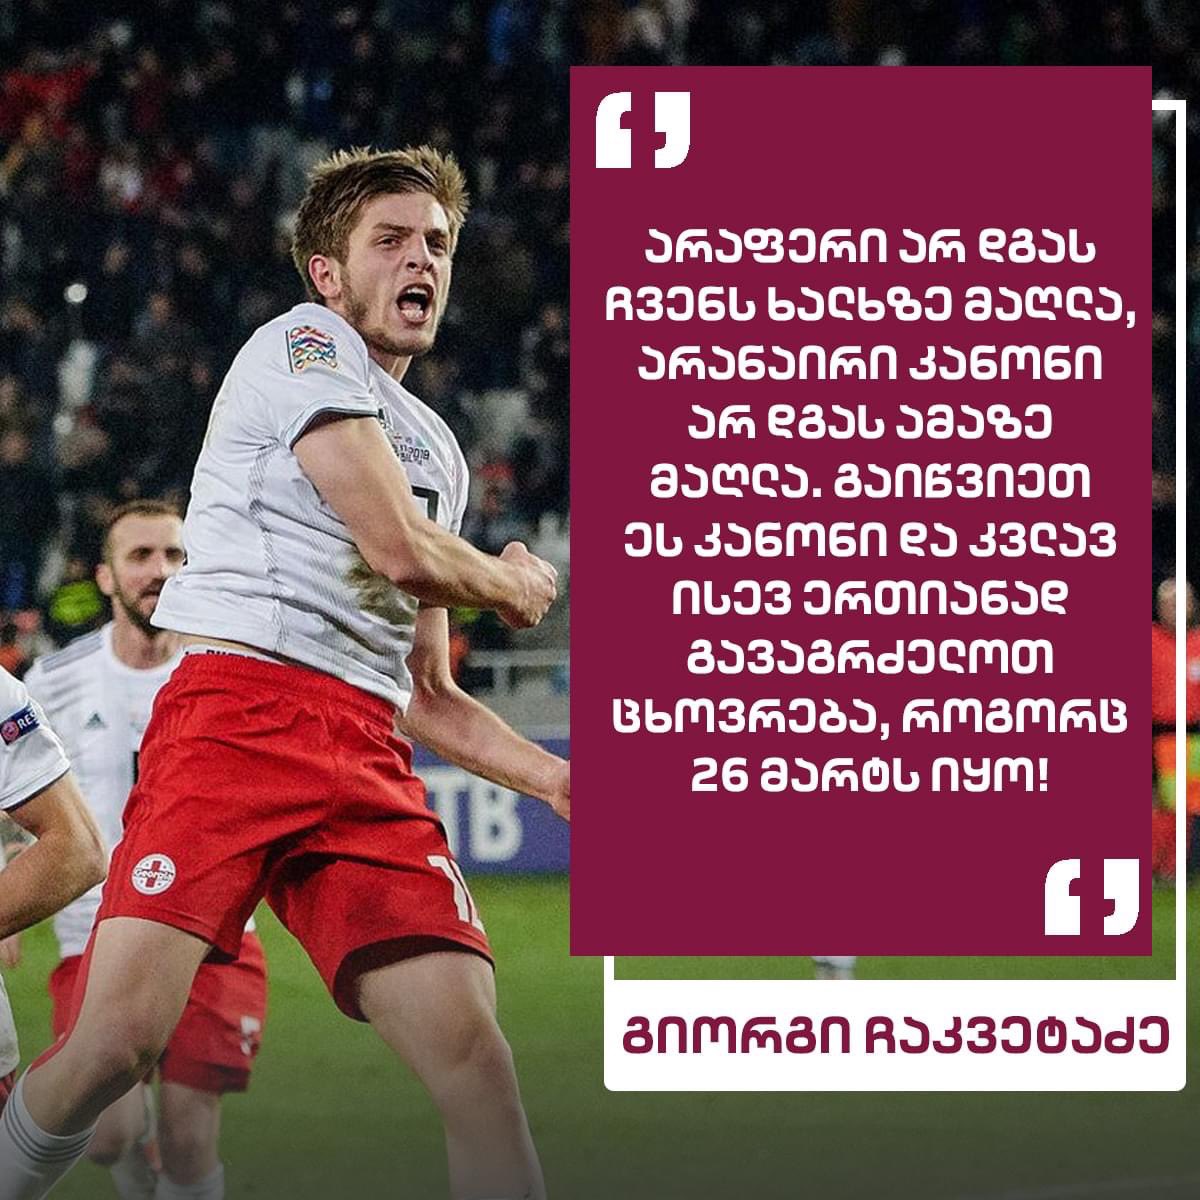 National Football Team of Georgia against the Russian law! Ivanishvili thinks money can buy everything. This boys just proved otherwise. Money can’t buy national dignity! 
#GeorgiaisEurope
#NOtoRussianLaw
#YEStoEurope